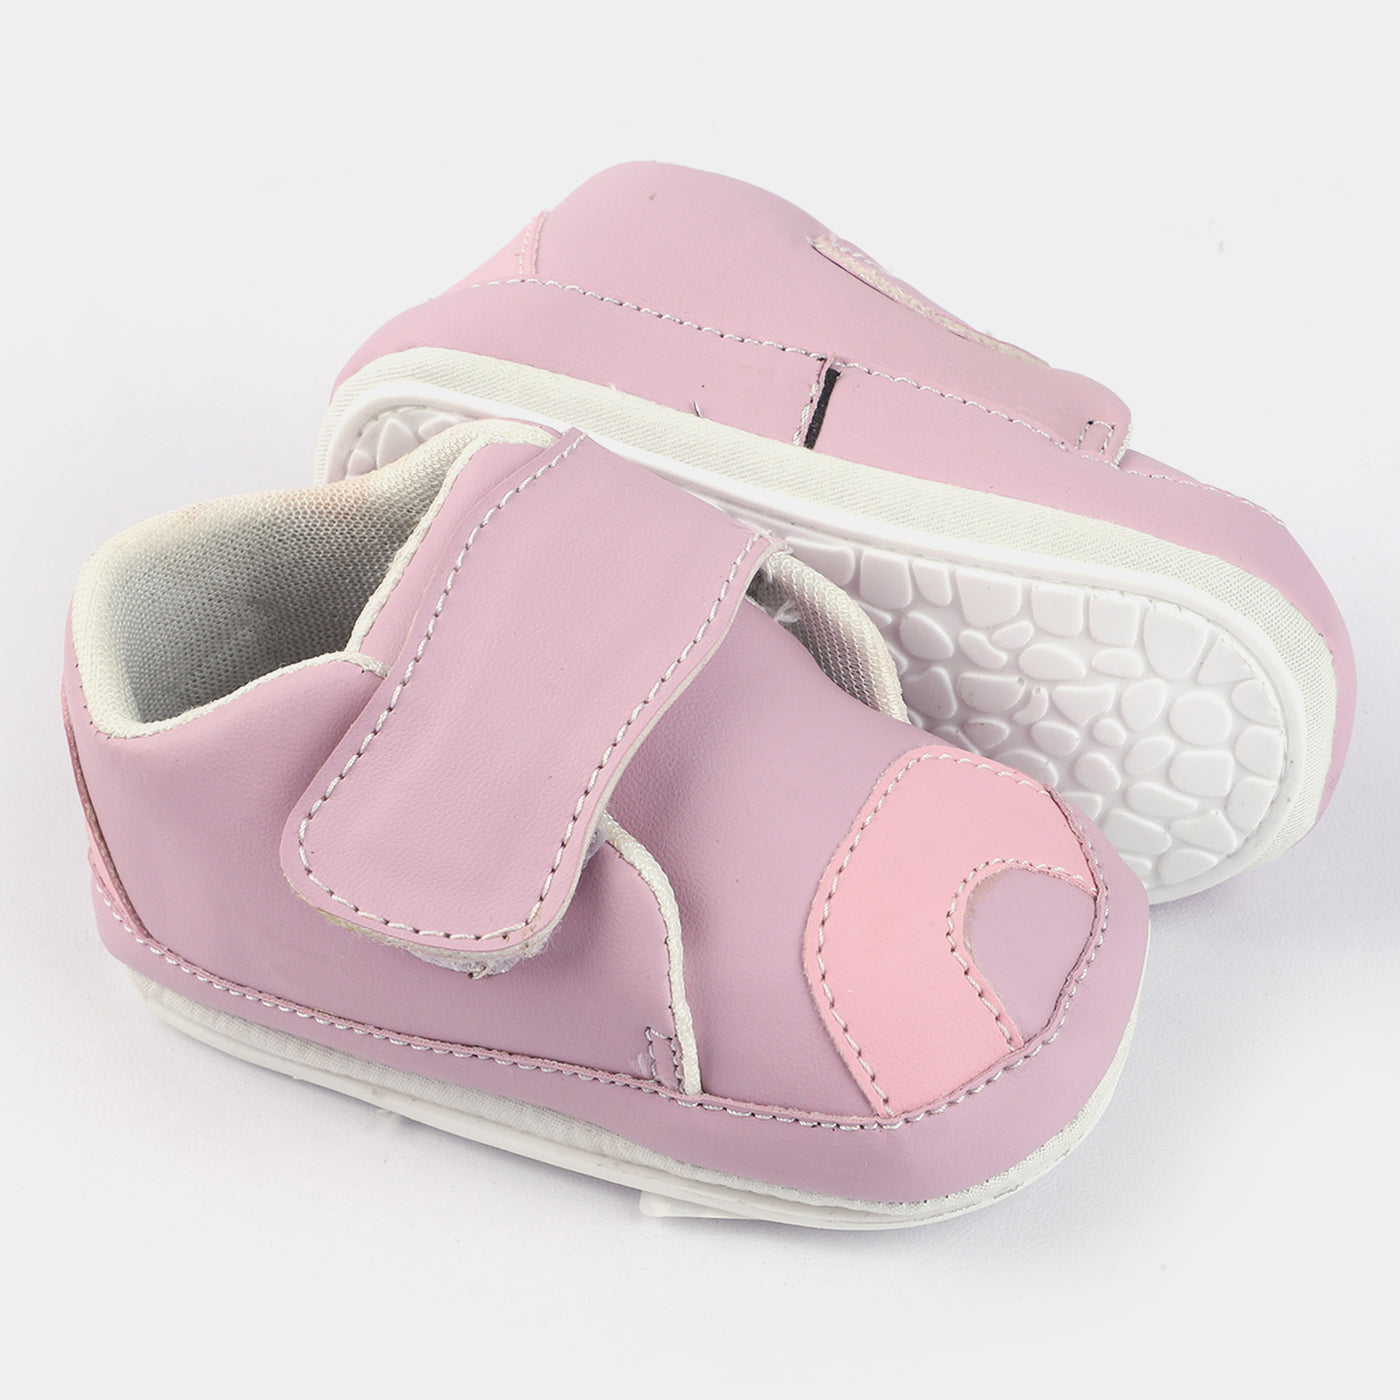 Baby Girl's Shoes 1908-Pink/Beige